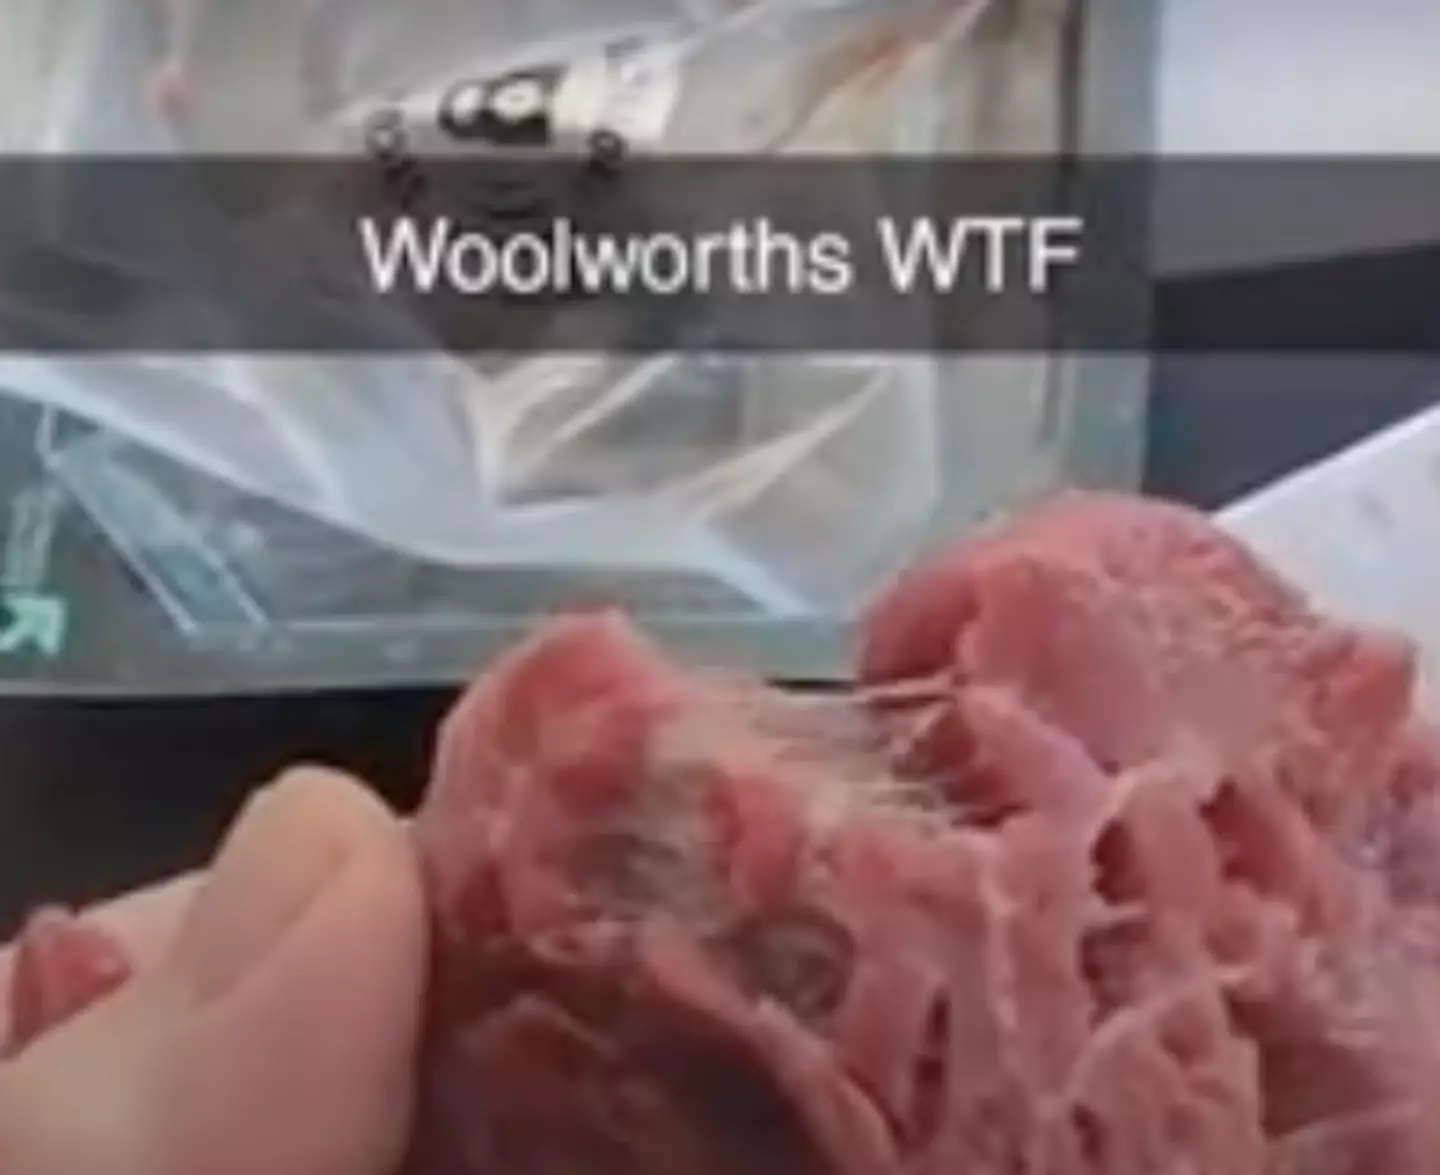 Woolworths has been accused by some social media users of using 'meat glue' (TikTok)